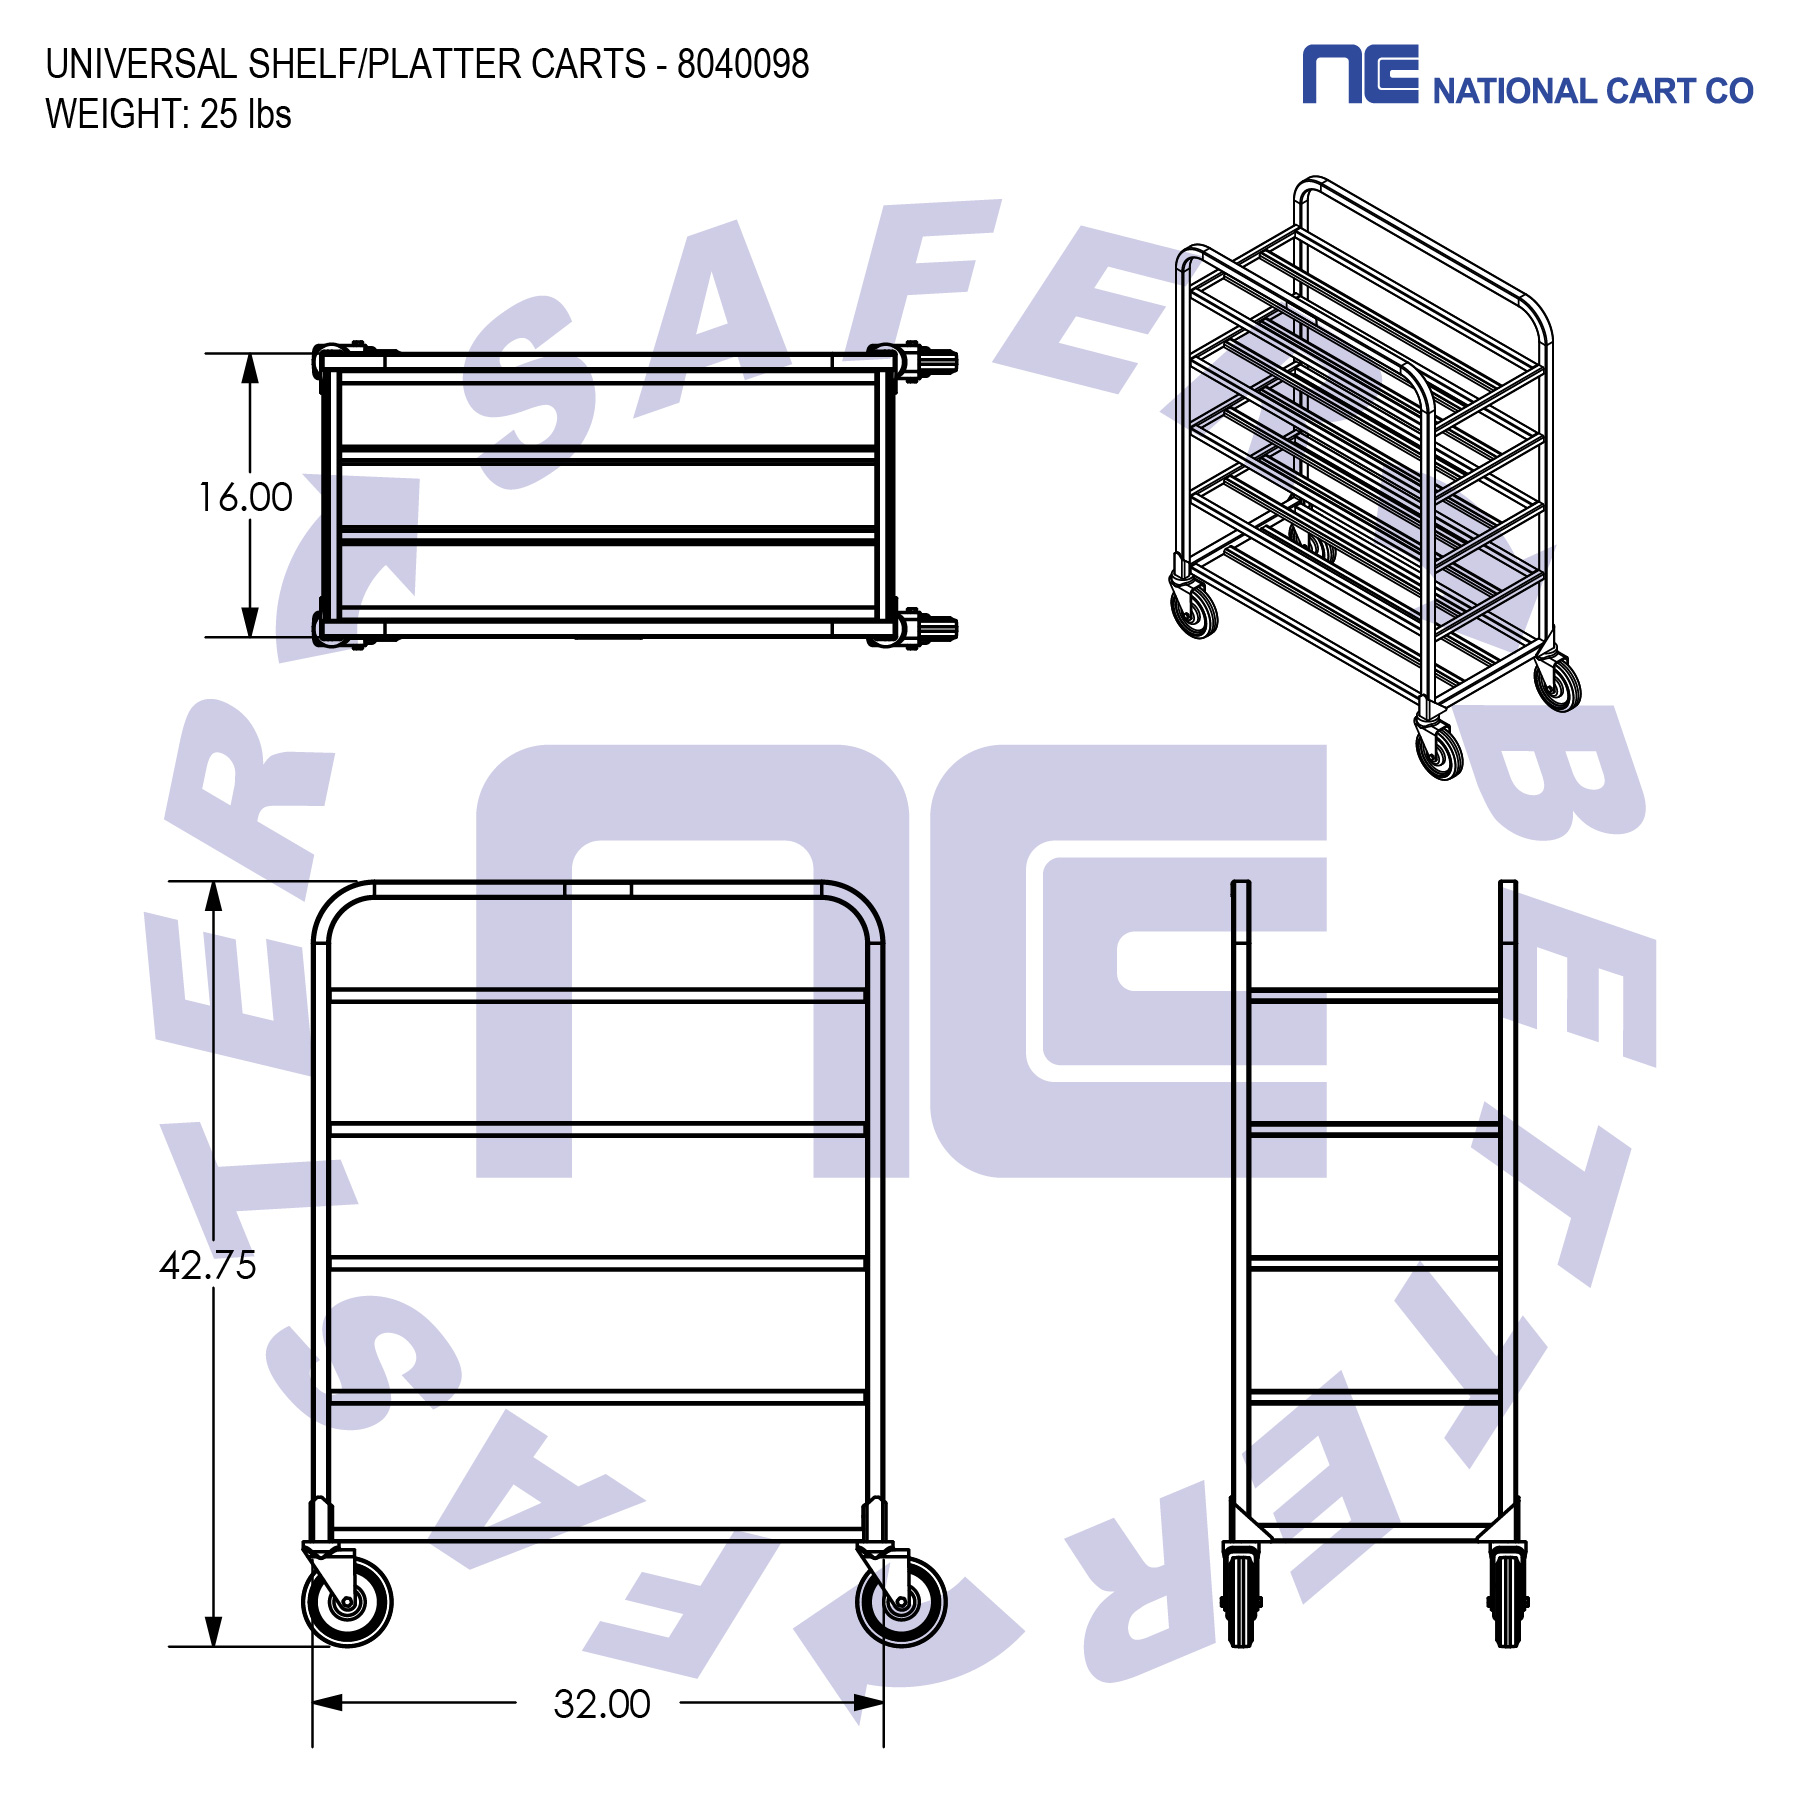 NSF approved. This food service cart meets strict standards and procedures imposed by NSF.